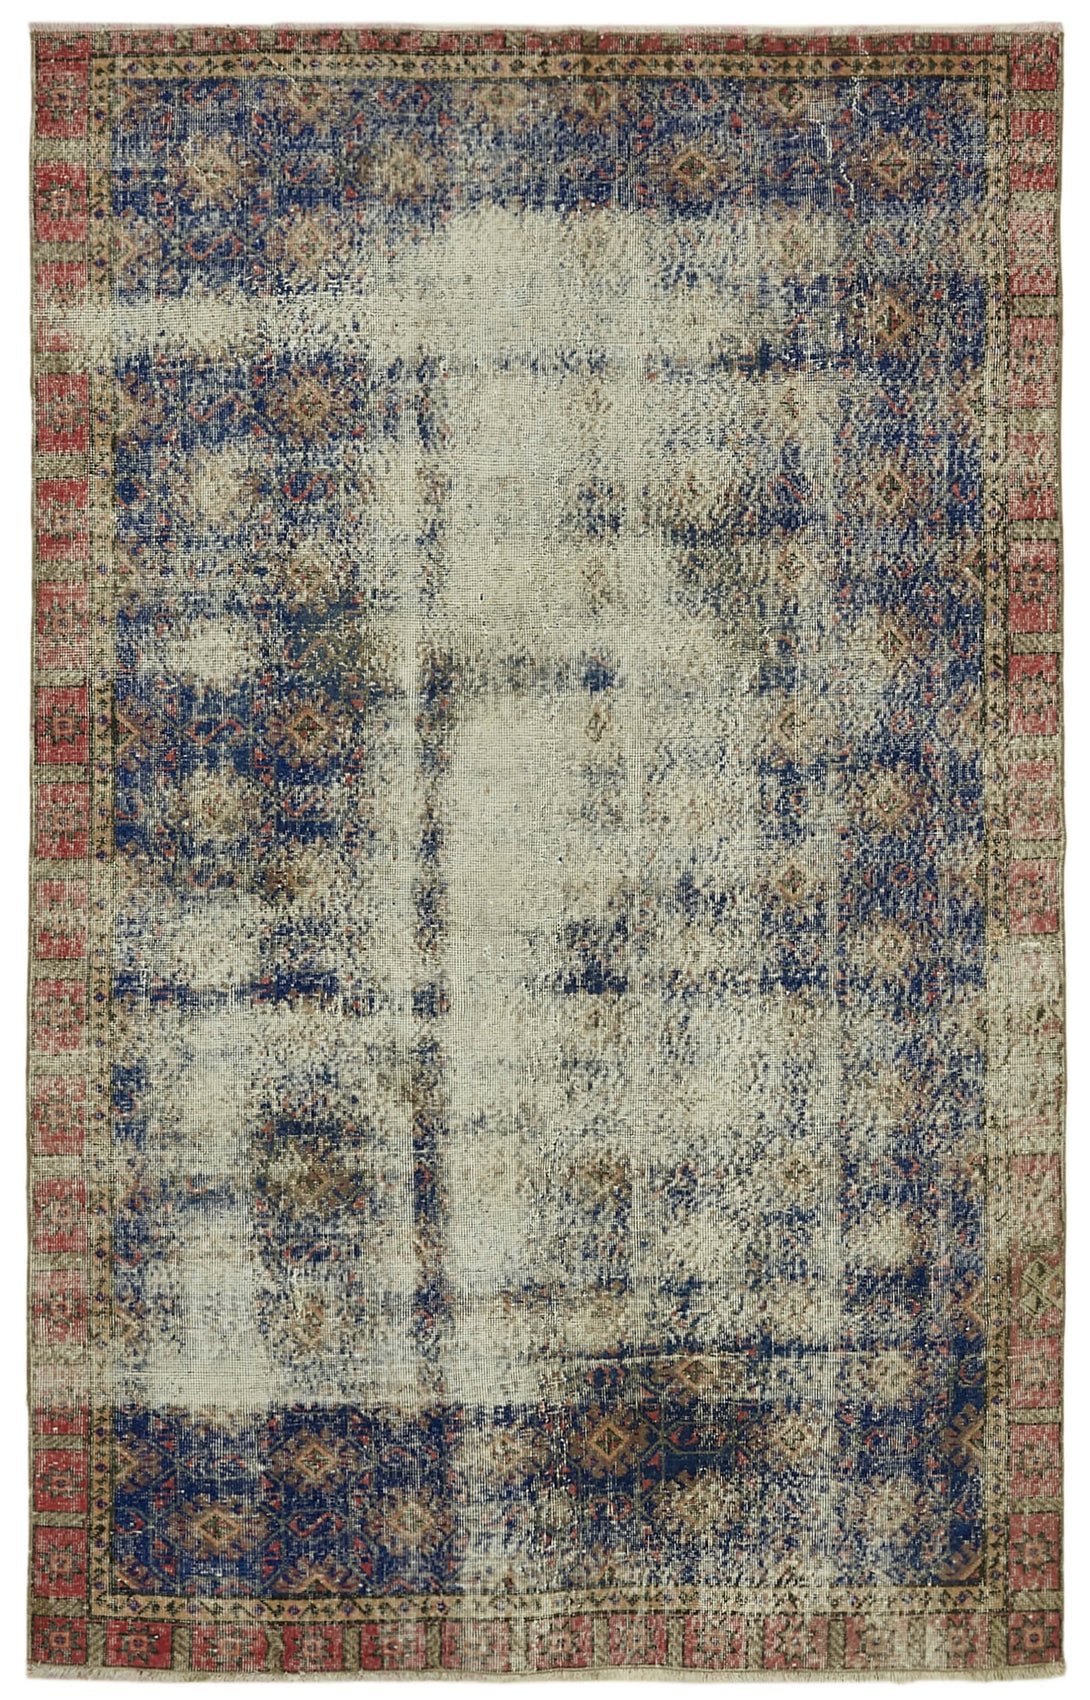 Handmade White Wash Area Rug > Design# OL-AC-41699 > Size: 5'-8" x 8'-10", Carpet Culture Rugs, Handmade Rugs, NYC Rugs, New Rugs, Shop Rugs, Rug Store, Outlet Rugs, SoHo Rugs, Rugs in USA